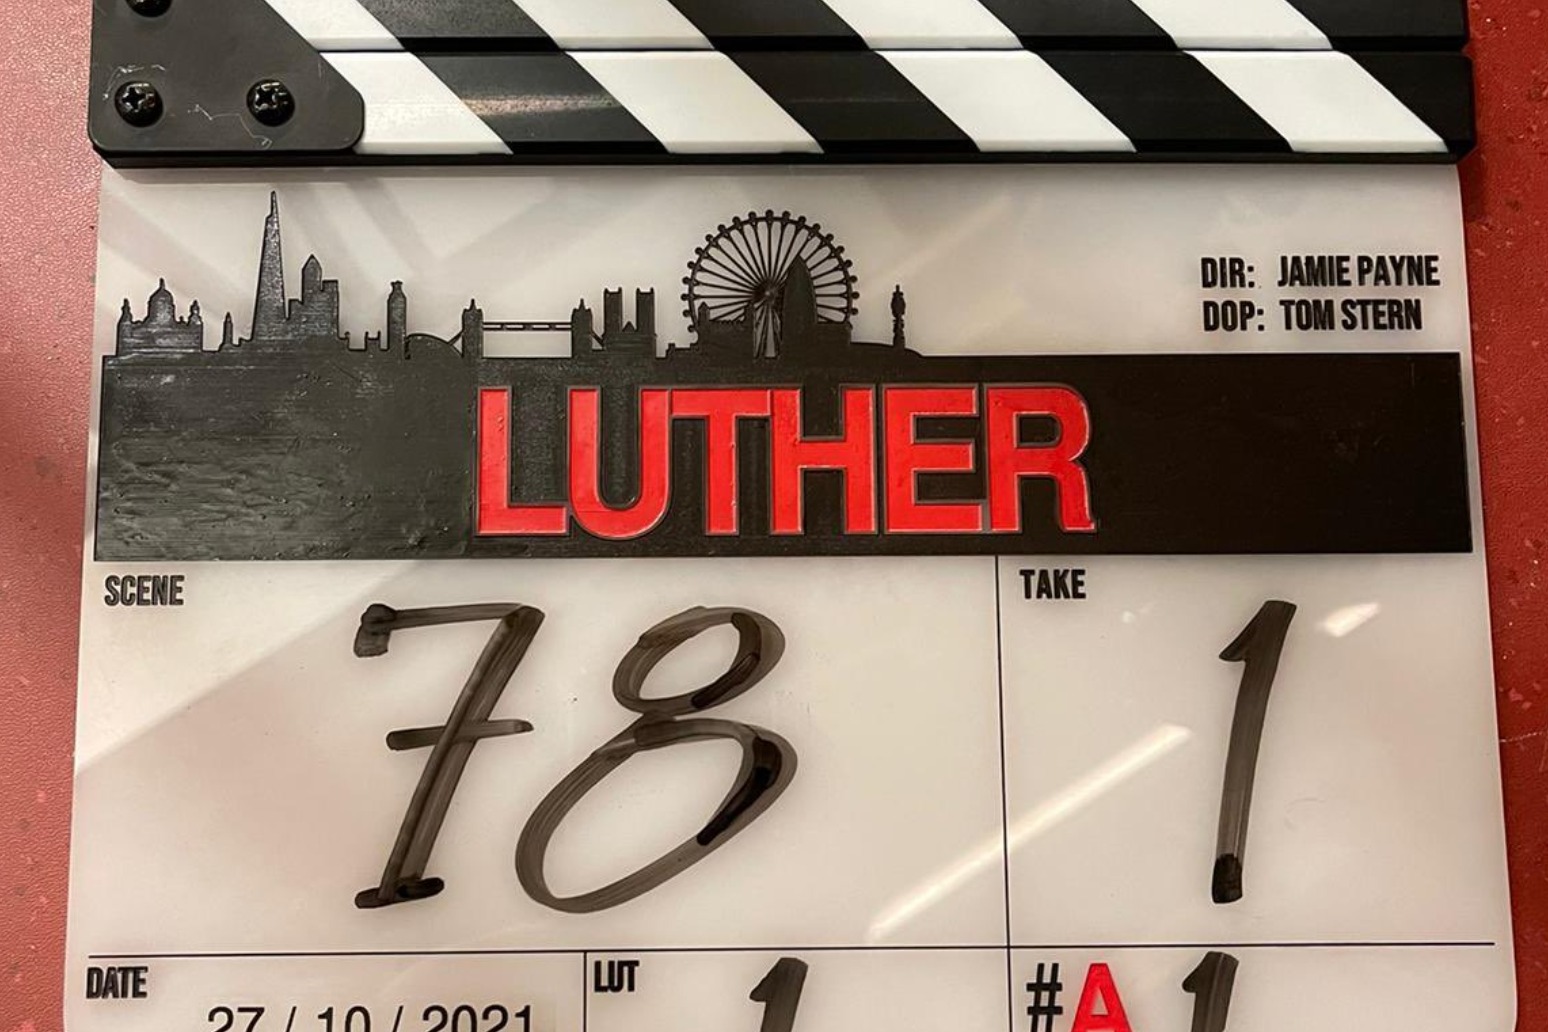 Idris Elba confirms return to Luther 